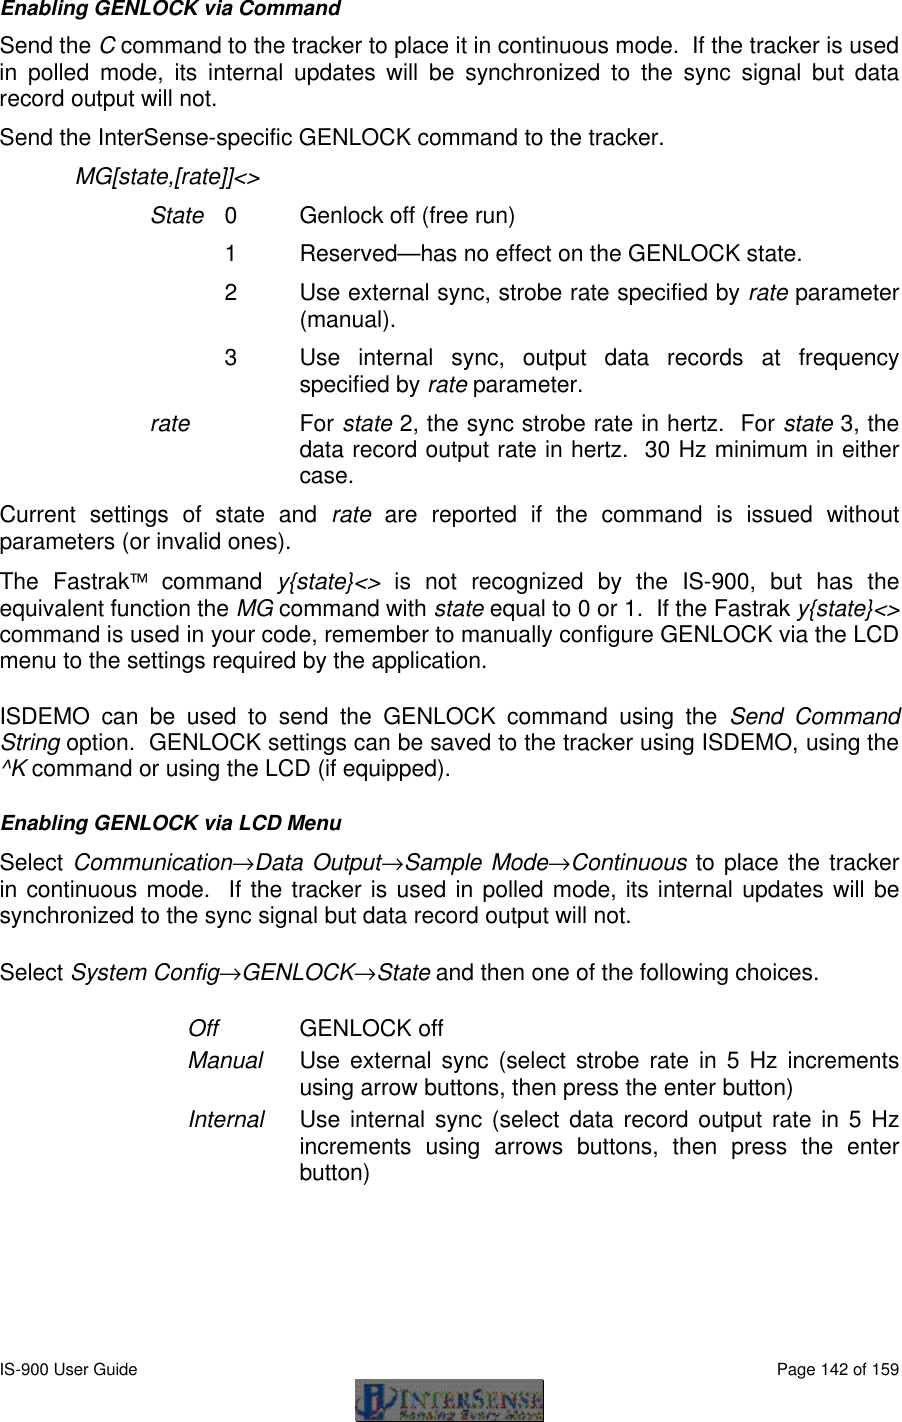  IS-900 User Guide                                                                                                                                          Page 142 of 159  Enabling GENLOCK via Command Send the C command to the tracker to place it in continuous mode.  If the tracker is used in polled mode, its internal updates will be synchronized to the sync signal but data record output will not. Send the InterSense-specific GENLOCK command to the tracker. MG[state,[rate]]&lt;&gt; State 0  Genlock off (free run) 1  Reserved—has no effect on the GENLOCK state. 2  Use external sync, strobe rate specified by rate parameter (manual). 3  Use internal sync, output data records at frequency specified by rate parameter. rate  For state 2, the sync strobe rate in hertz.  For state 3, the data record output rate in hertz.  30 Hz minimum in either case. Current settings of state and rate are reported if the command is issued without parameters (or invalid ones). The Fastrak command y{state}&lt;&gt; is not recognized by the IS-900, but has the equivalent function the MG command with state equal to 0 or 1.  If the Fastrak y{state}&lt;&gt; command is used in your code, remember to manually configure GENLOCK via the LCD menu to the settings required by the application. ISDEMO can be used to send the GENLOCK command using the Send Command String option.  GENLOCK settings can be saved to the tracker using ISDEMO, using the ^K command or using the LCD (if equipped). Enabling GENLOCK via LCD Menu Select Communication→Data Output→Sample Mode→Continuous to place the tracker in continuous mode.  If the tracker is used in polled mode, its internal updates will be synchronized to the sync signal but data record output will not. Select System Config→GENLOCK→State and then one of the following choices. Off GENLOCK off Manual Use external sync (select strobe rate in 5 Hz increments using arrow buttons, then press the enter button) Internal Use internal sync (select data record output rate in 5 Hz increments using arrows buttons, then press the enter button) 